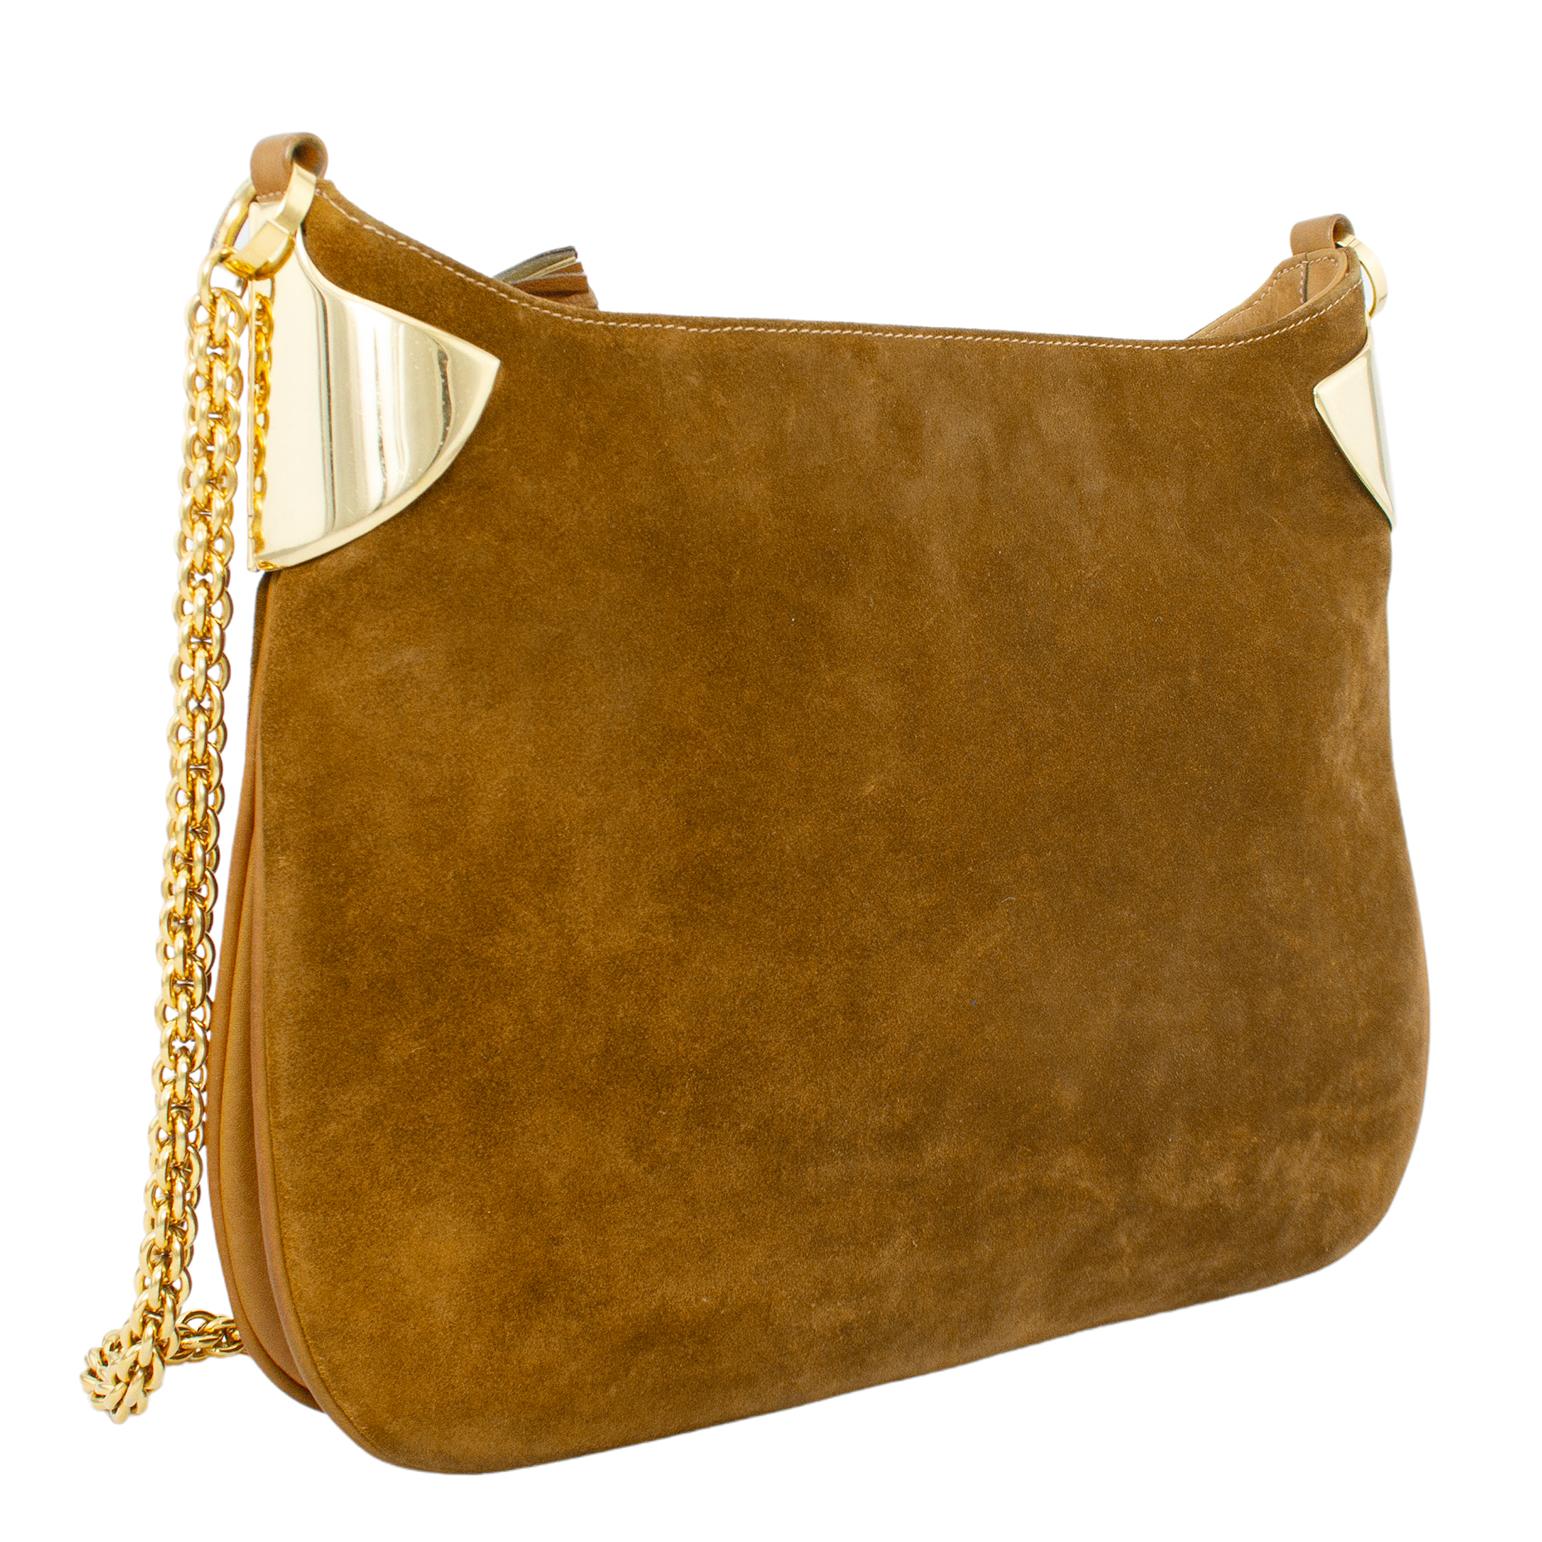 Stunning 1970s Gucci shoulder bag. Caramel brown suede with bright gold tone metal accents and hardware. Saddle shape with heavy and thick chain shoulder strap. Plastic top zipper with tassel zipper tab. Large single compartment suede interior with